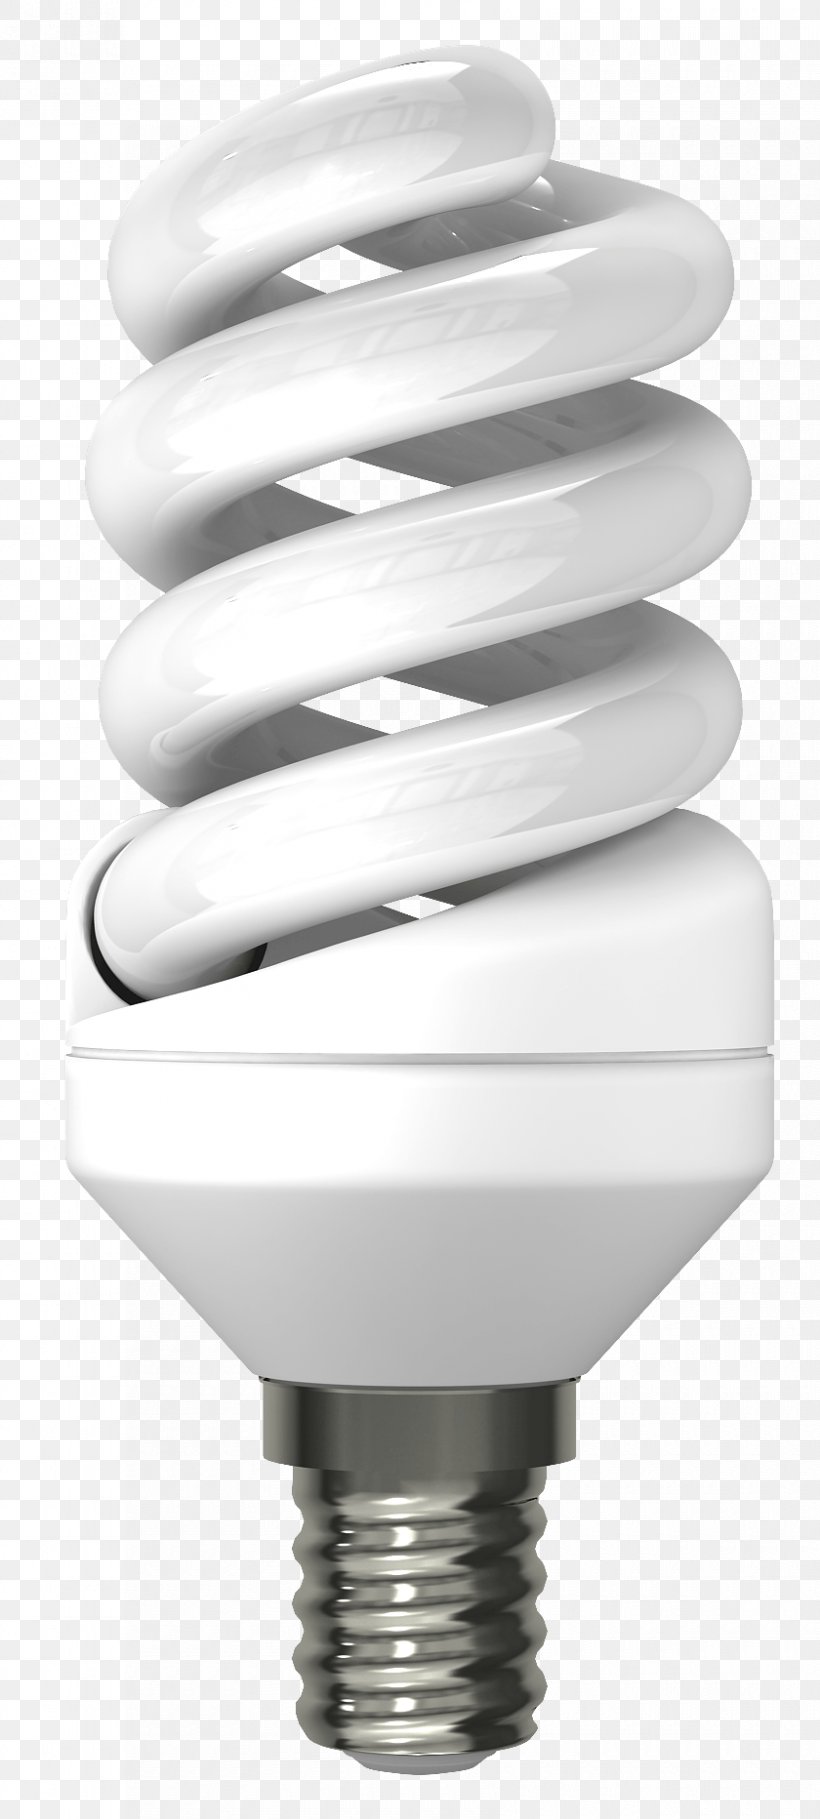 Incandescent Light Bulb Icon, PNG, 840x1864px, Light, Compact Fluorescent Lamp, Electric Light, Electricity, Fluorescent Lamp Download Free